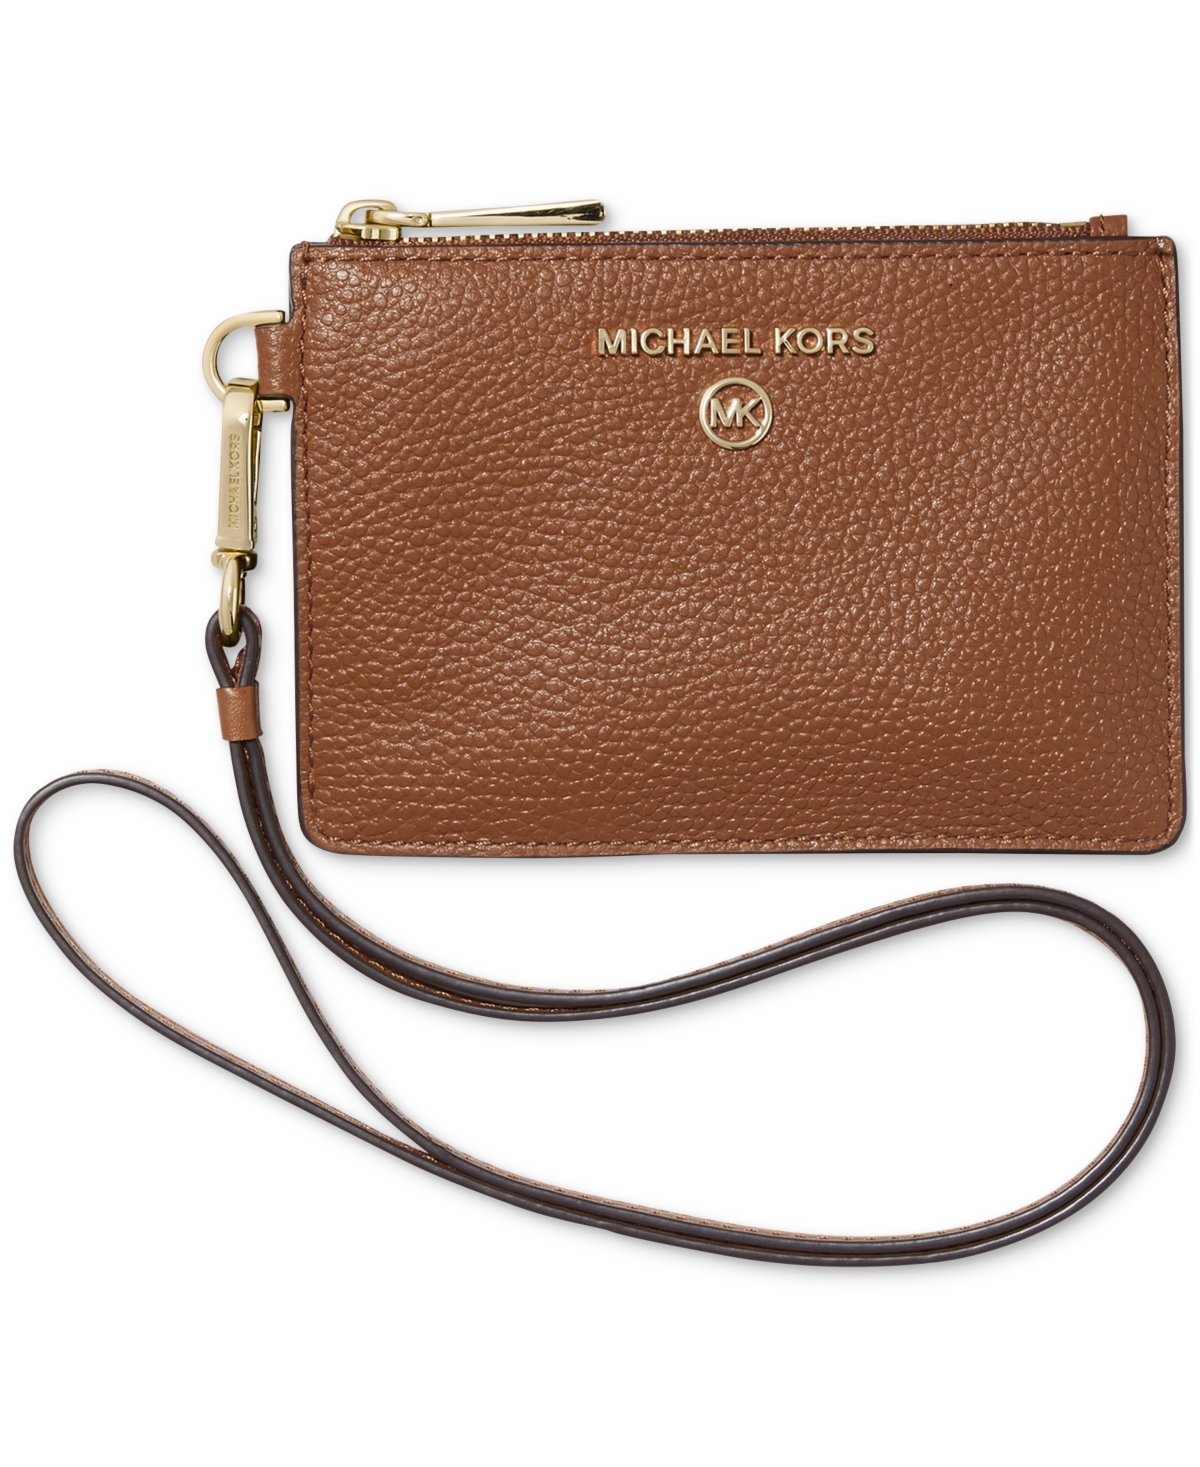 Michael Kors Jet Set Small Coin Convertible Lanyard In Luggage